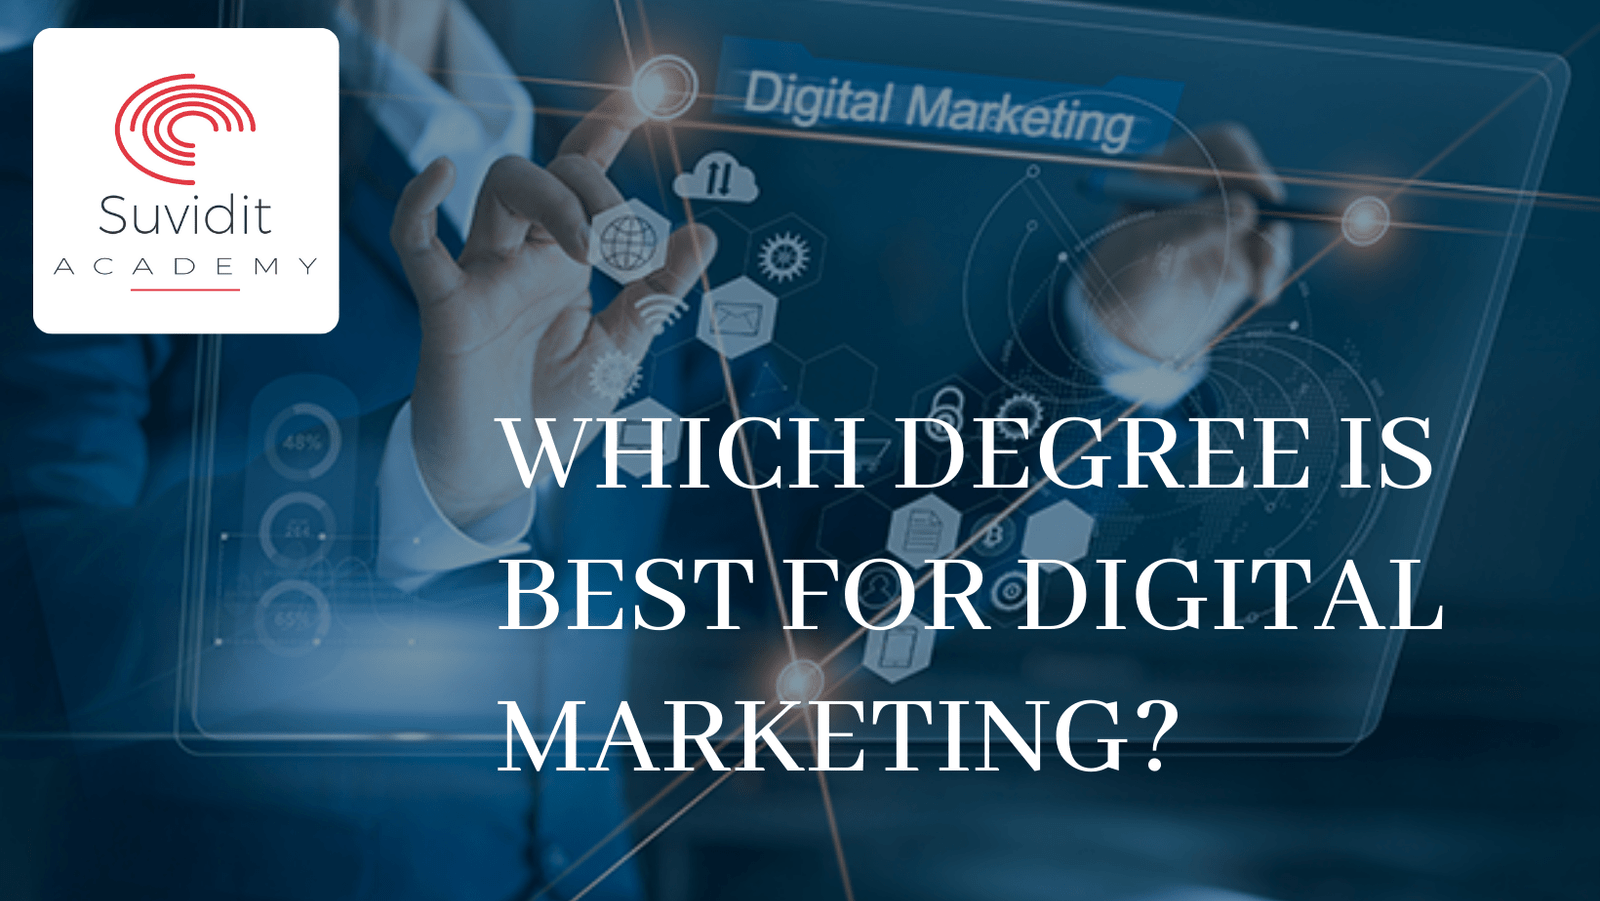 Which is the best degree for Digital Marketing?